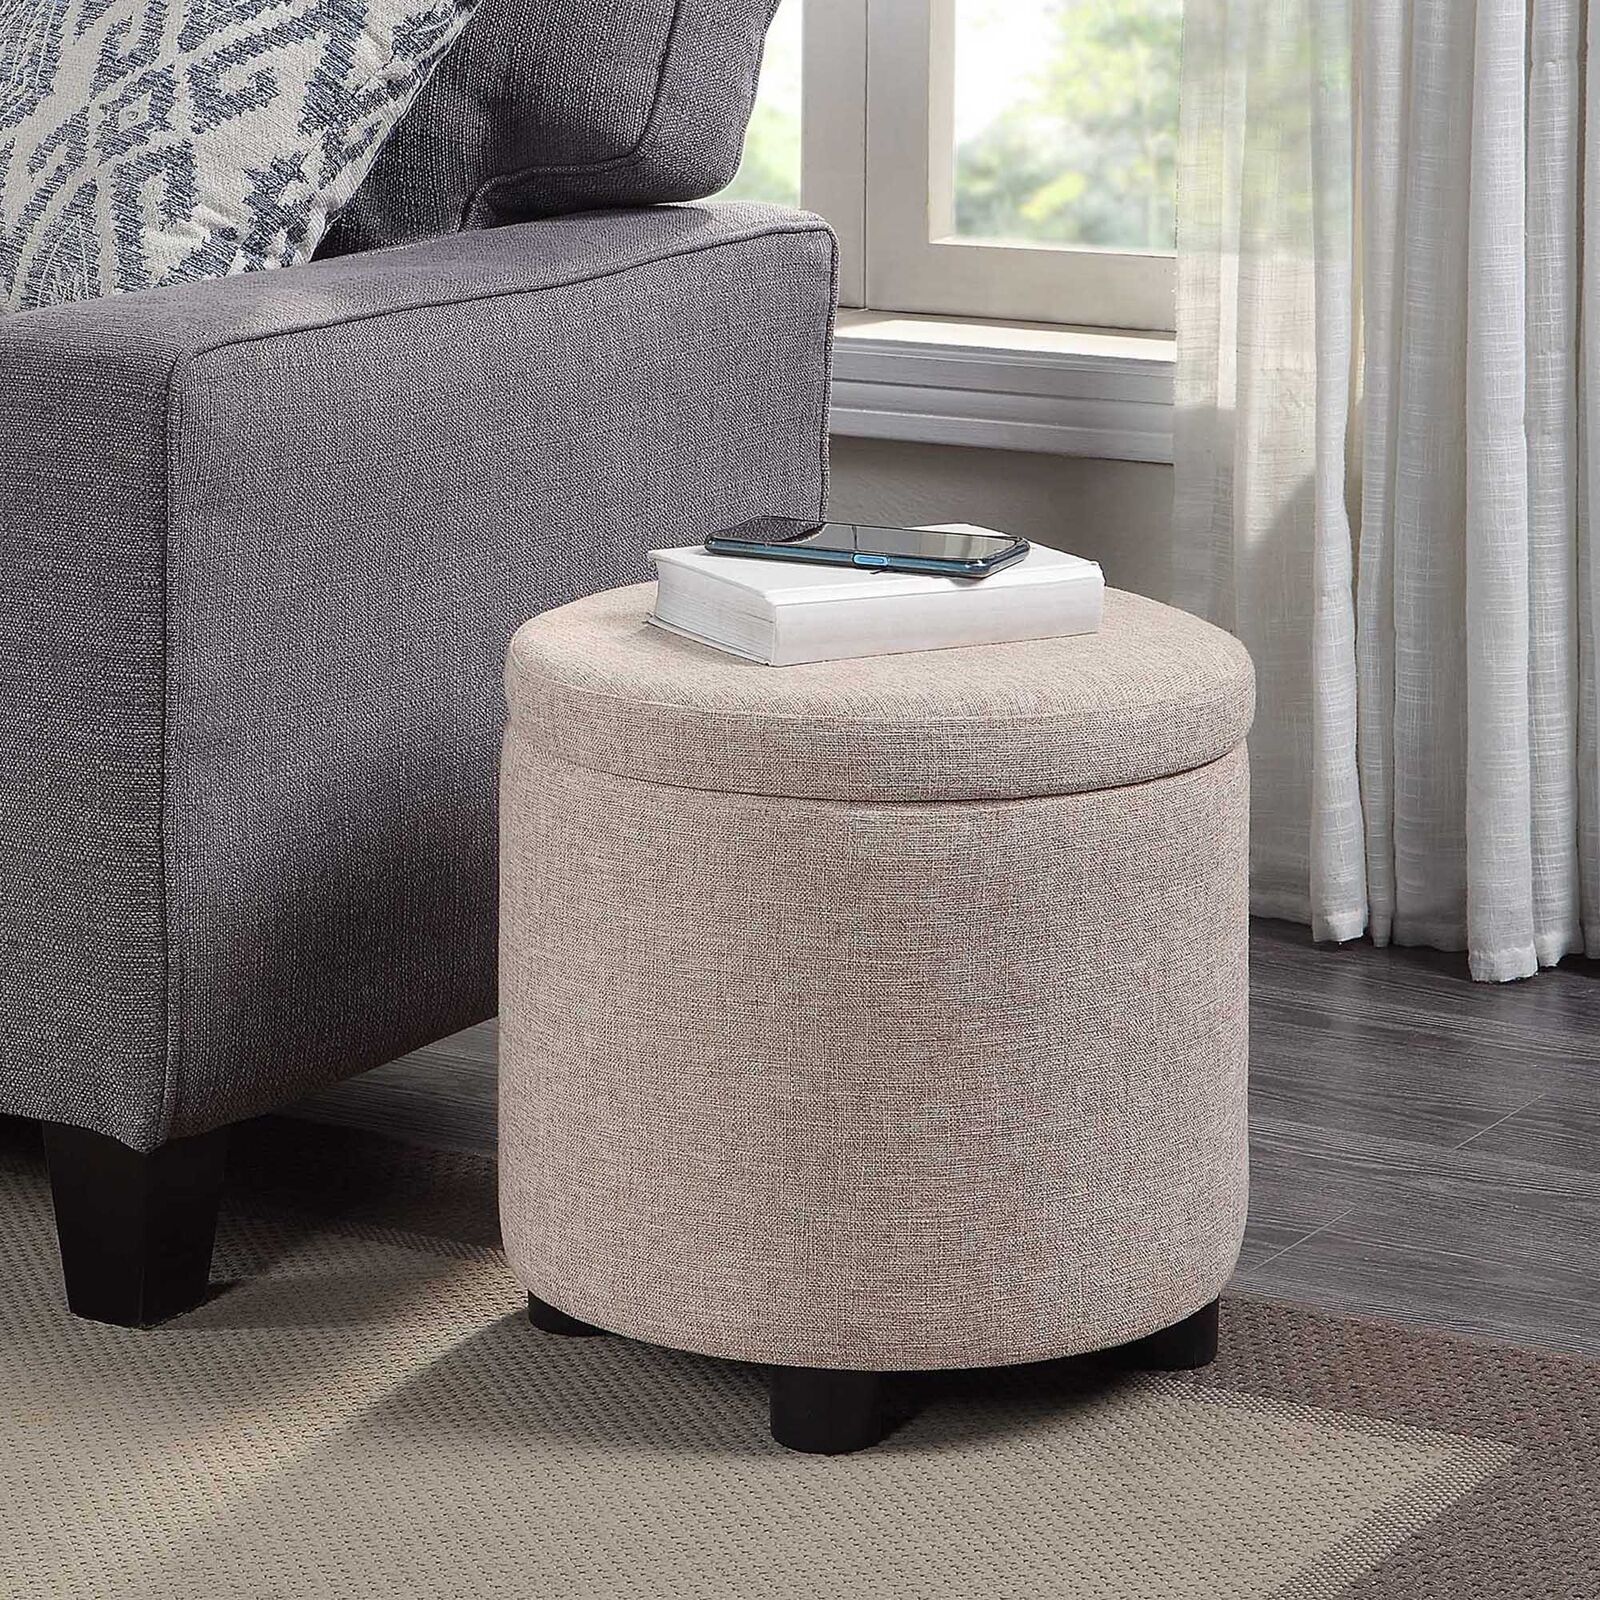 Round Accent Storage Ottoman With Reversible Tray Lid, Tan Fabric | Ebay Inside Ottomans With Stool And Reversible Tray (View 12 of 15)